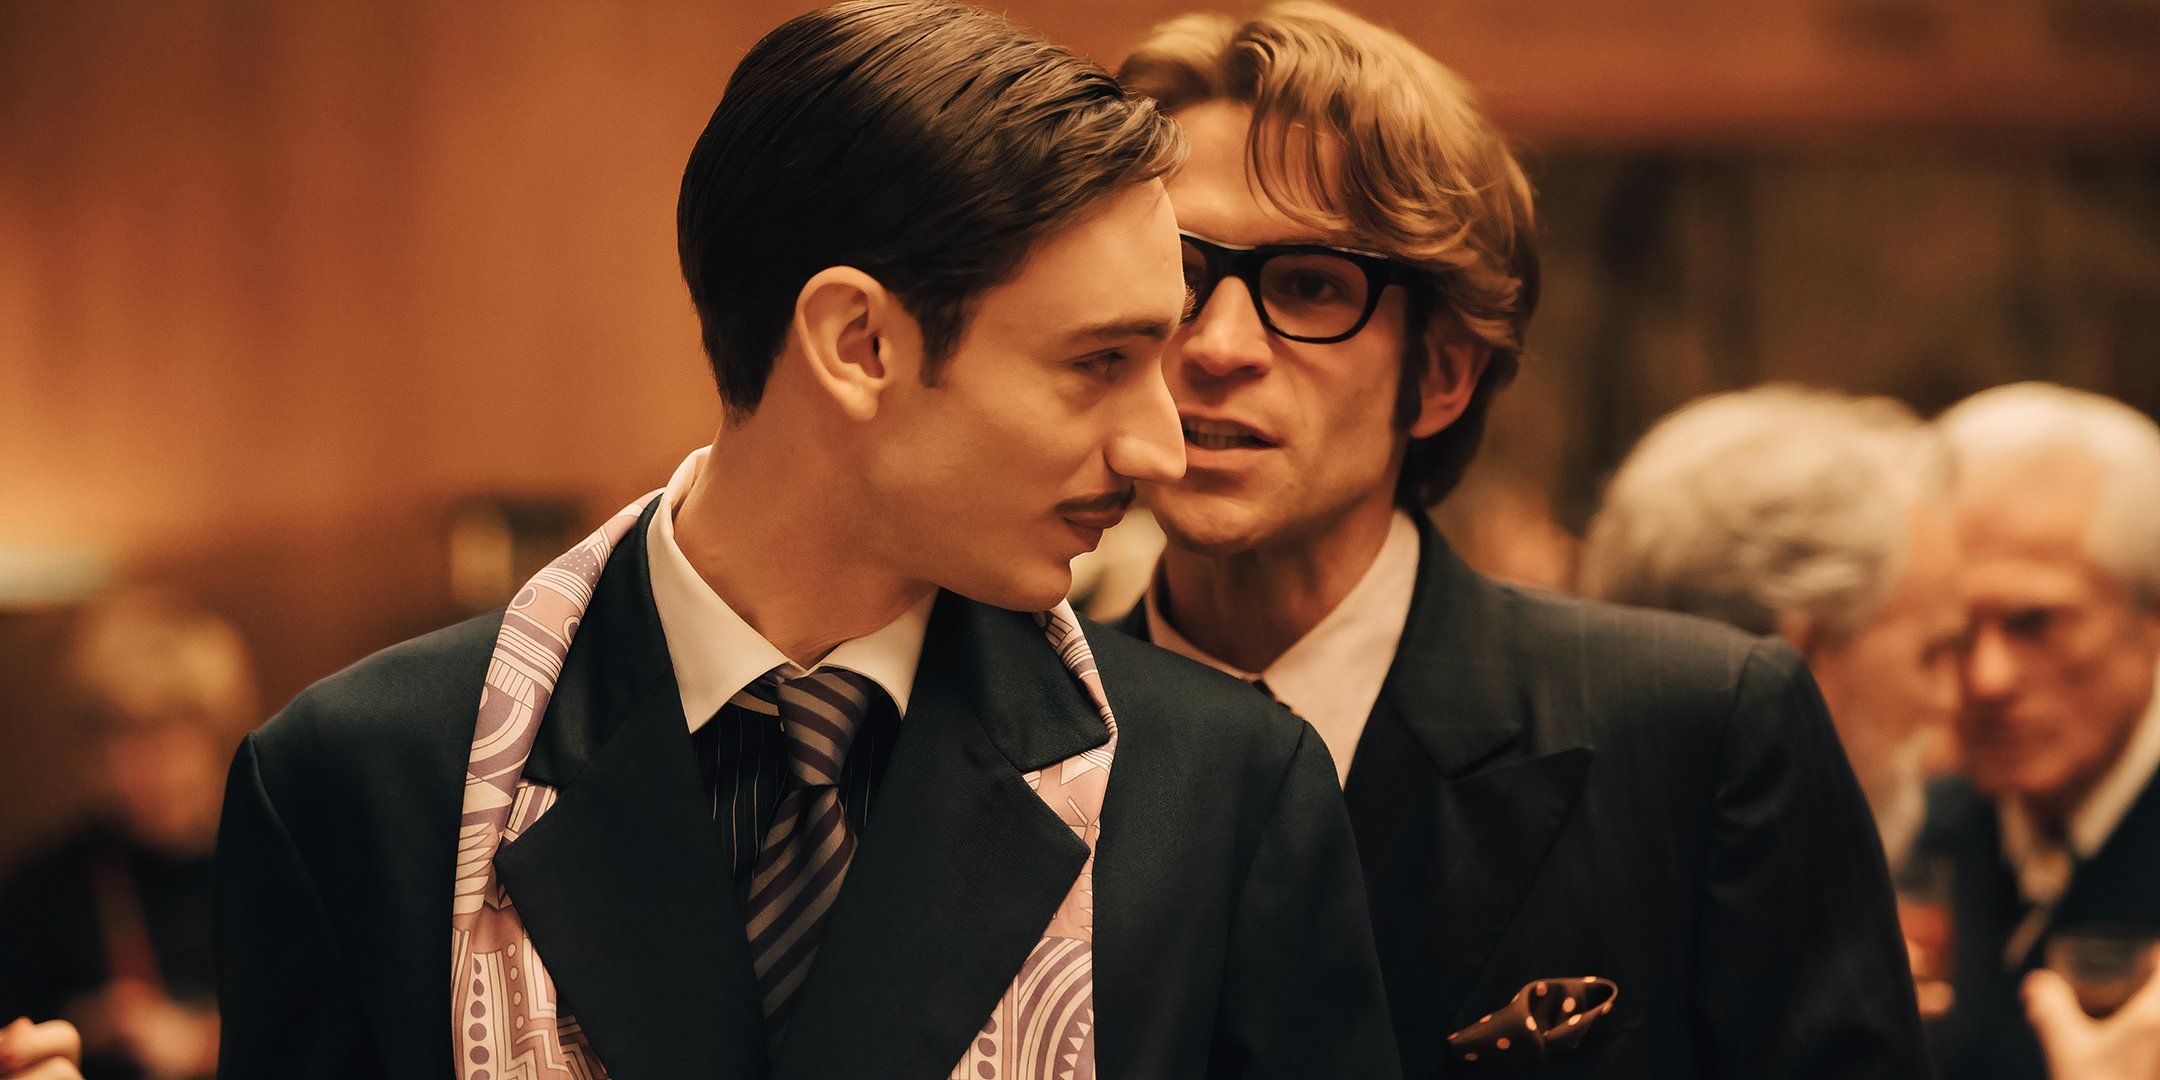 Yves Saint Laurent flirting with Jacques de Bascher in Becoming Karl Lagerfeld